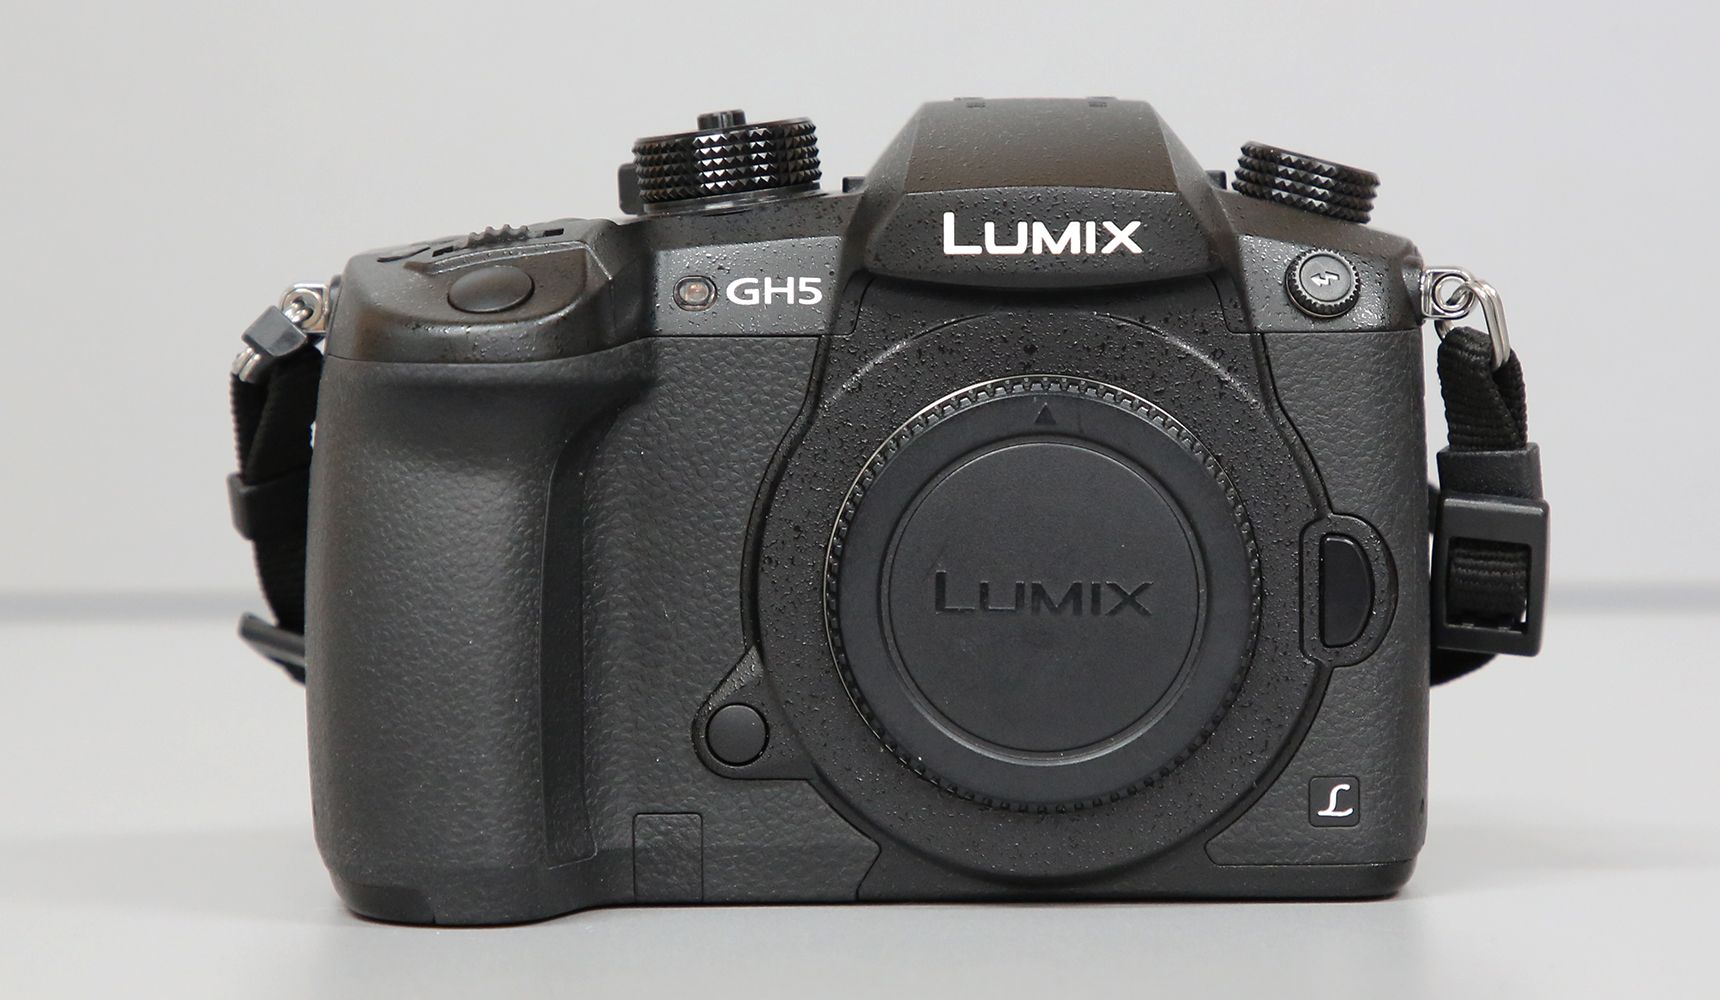 PANASONIC - DC-GH5 - Lumix GH5 (body only) - Used